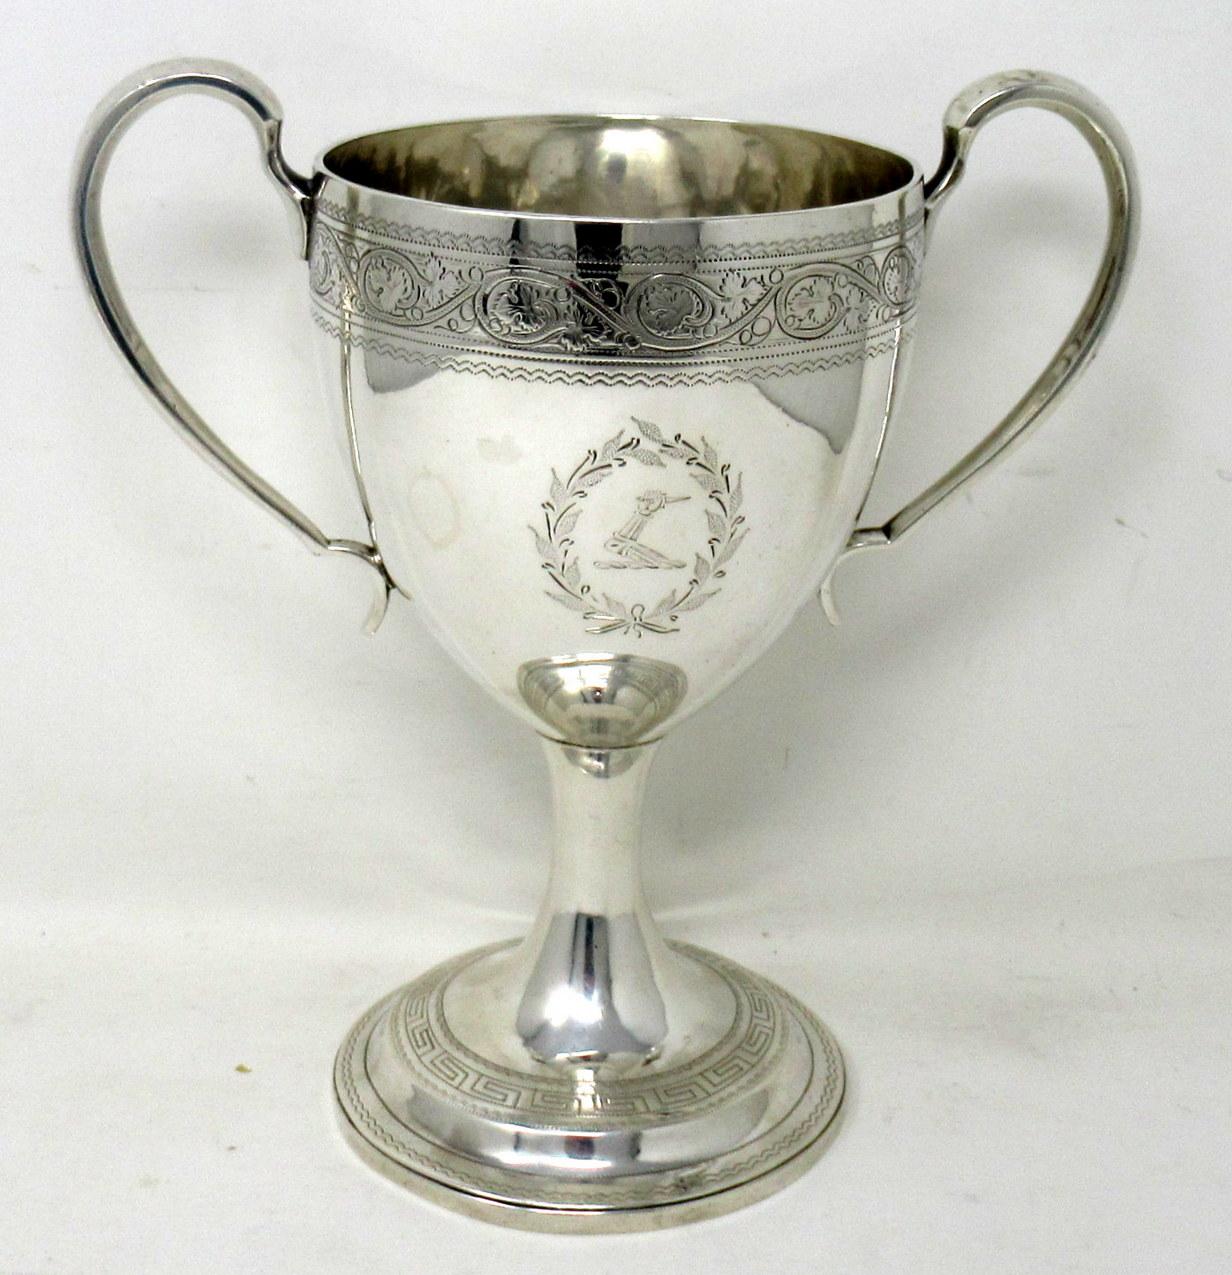 Magnificent large and rare George lll Irish sterling Dublin silver loving cup of large proportions, with twin “C” handles. Engraved Coat of Arms for Trench Family. 

Mark of Daniel Egan. Dublin. Ireland.

Dublin Hallmark for 1807. 

The main outer